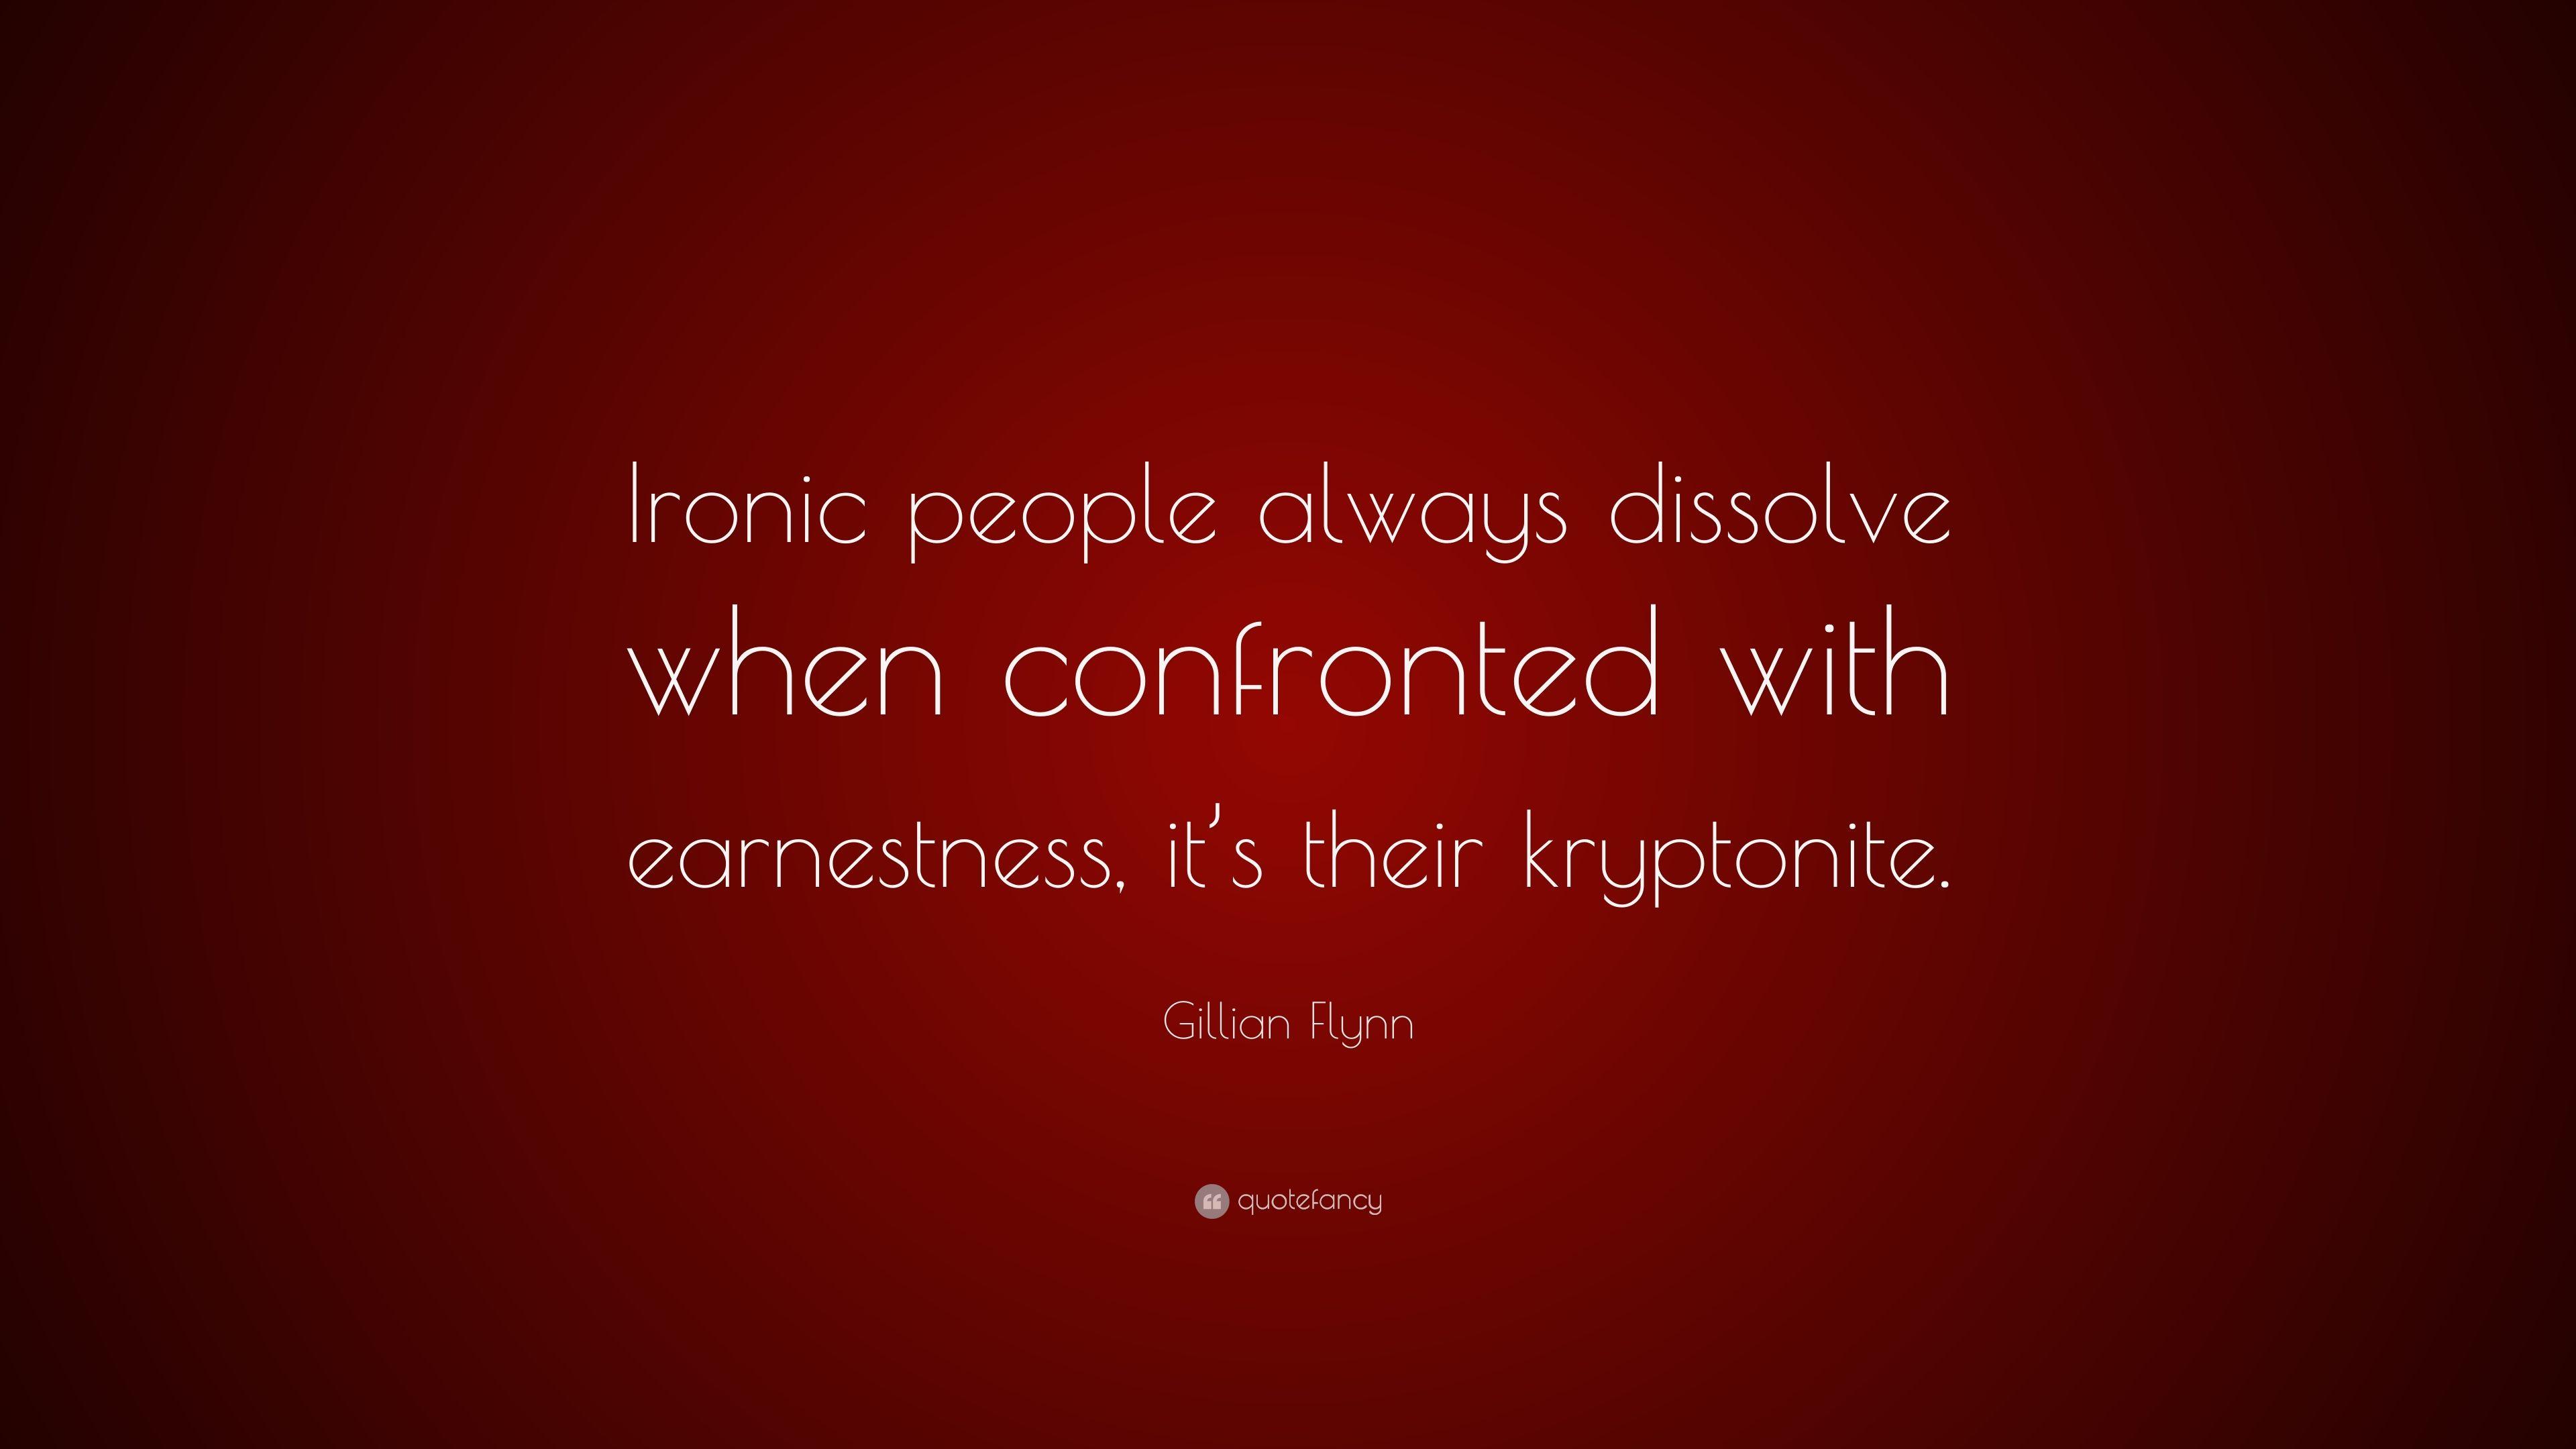 Gillian Flynn Quote: “Ironic people always dissolve when confronted